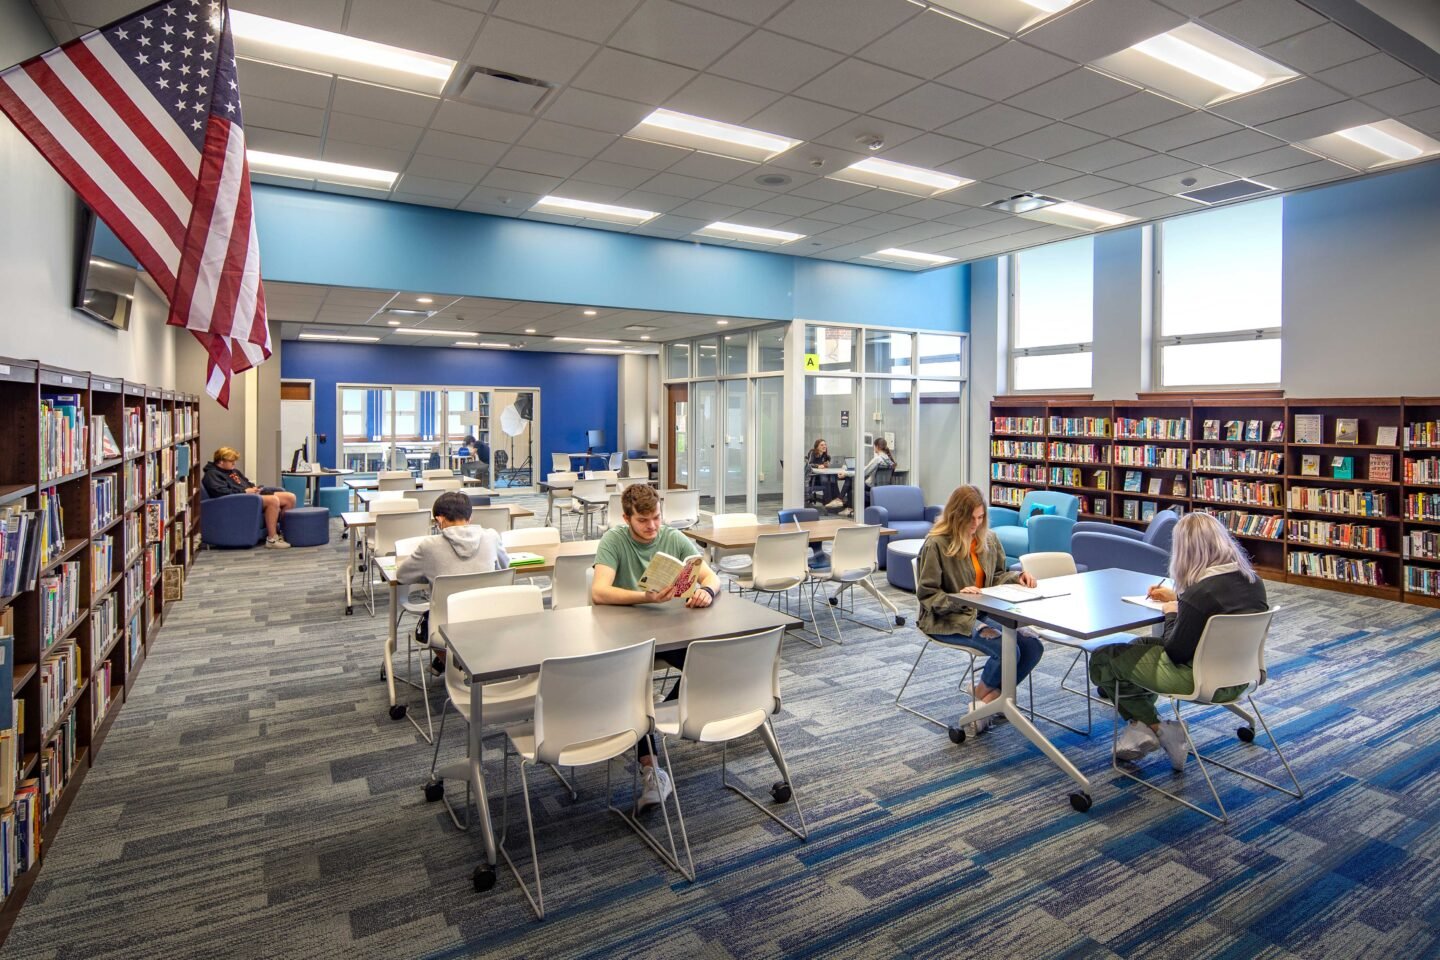 WHITFISH BAY HS LIBRARY